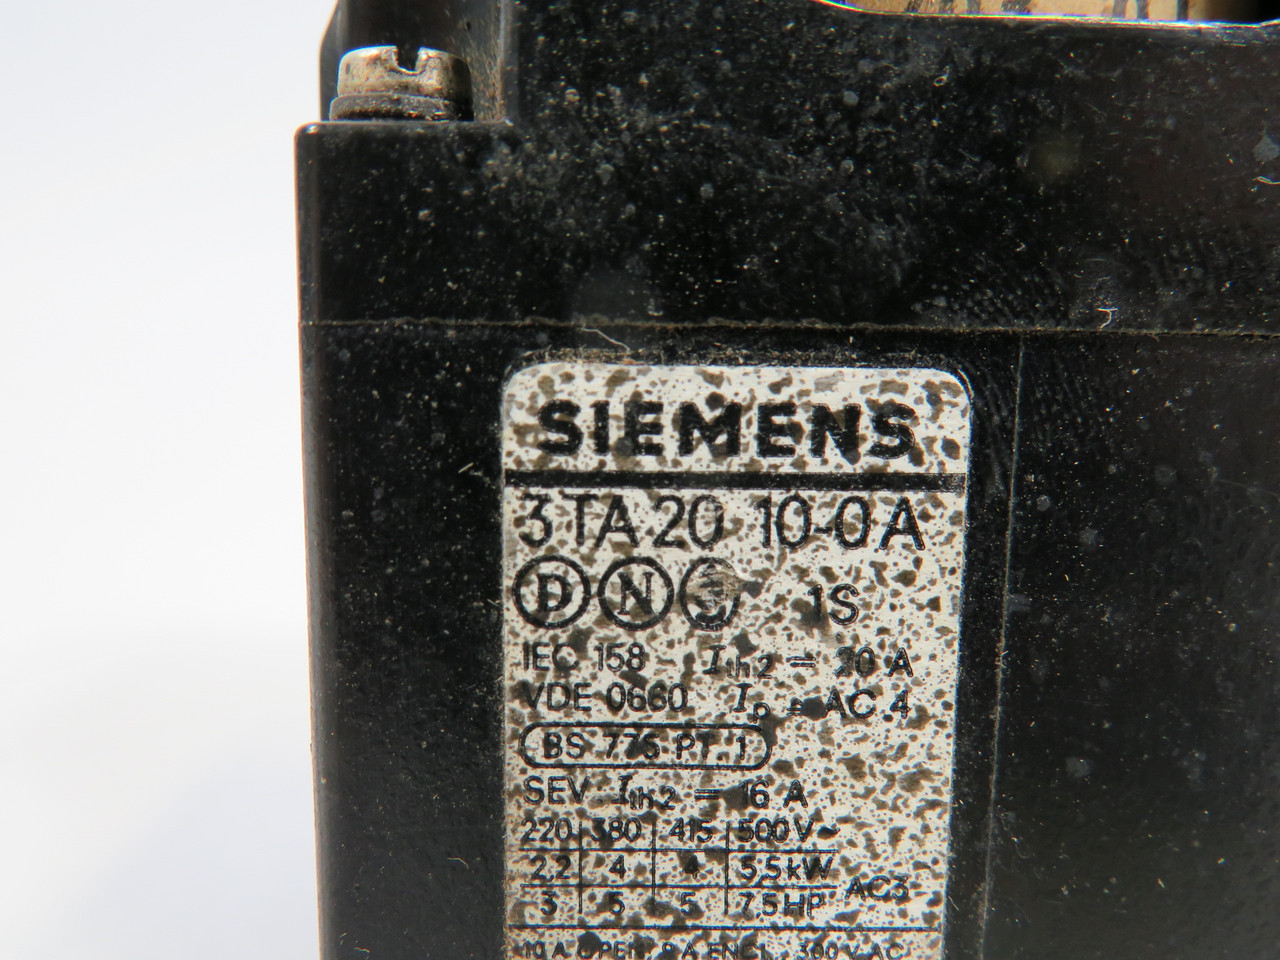 Siemens 3TA2010-0A Contactor 115V@60Hz USED